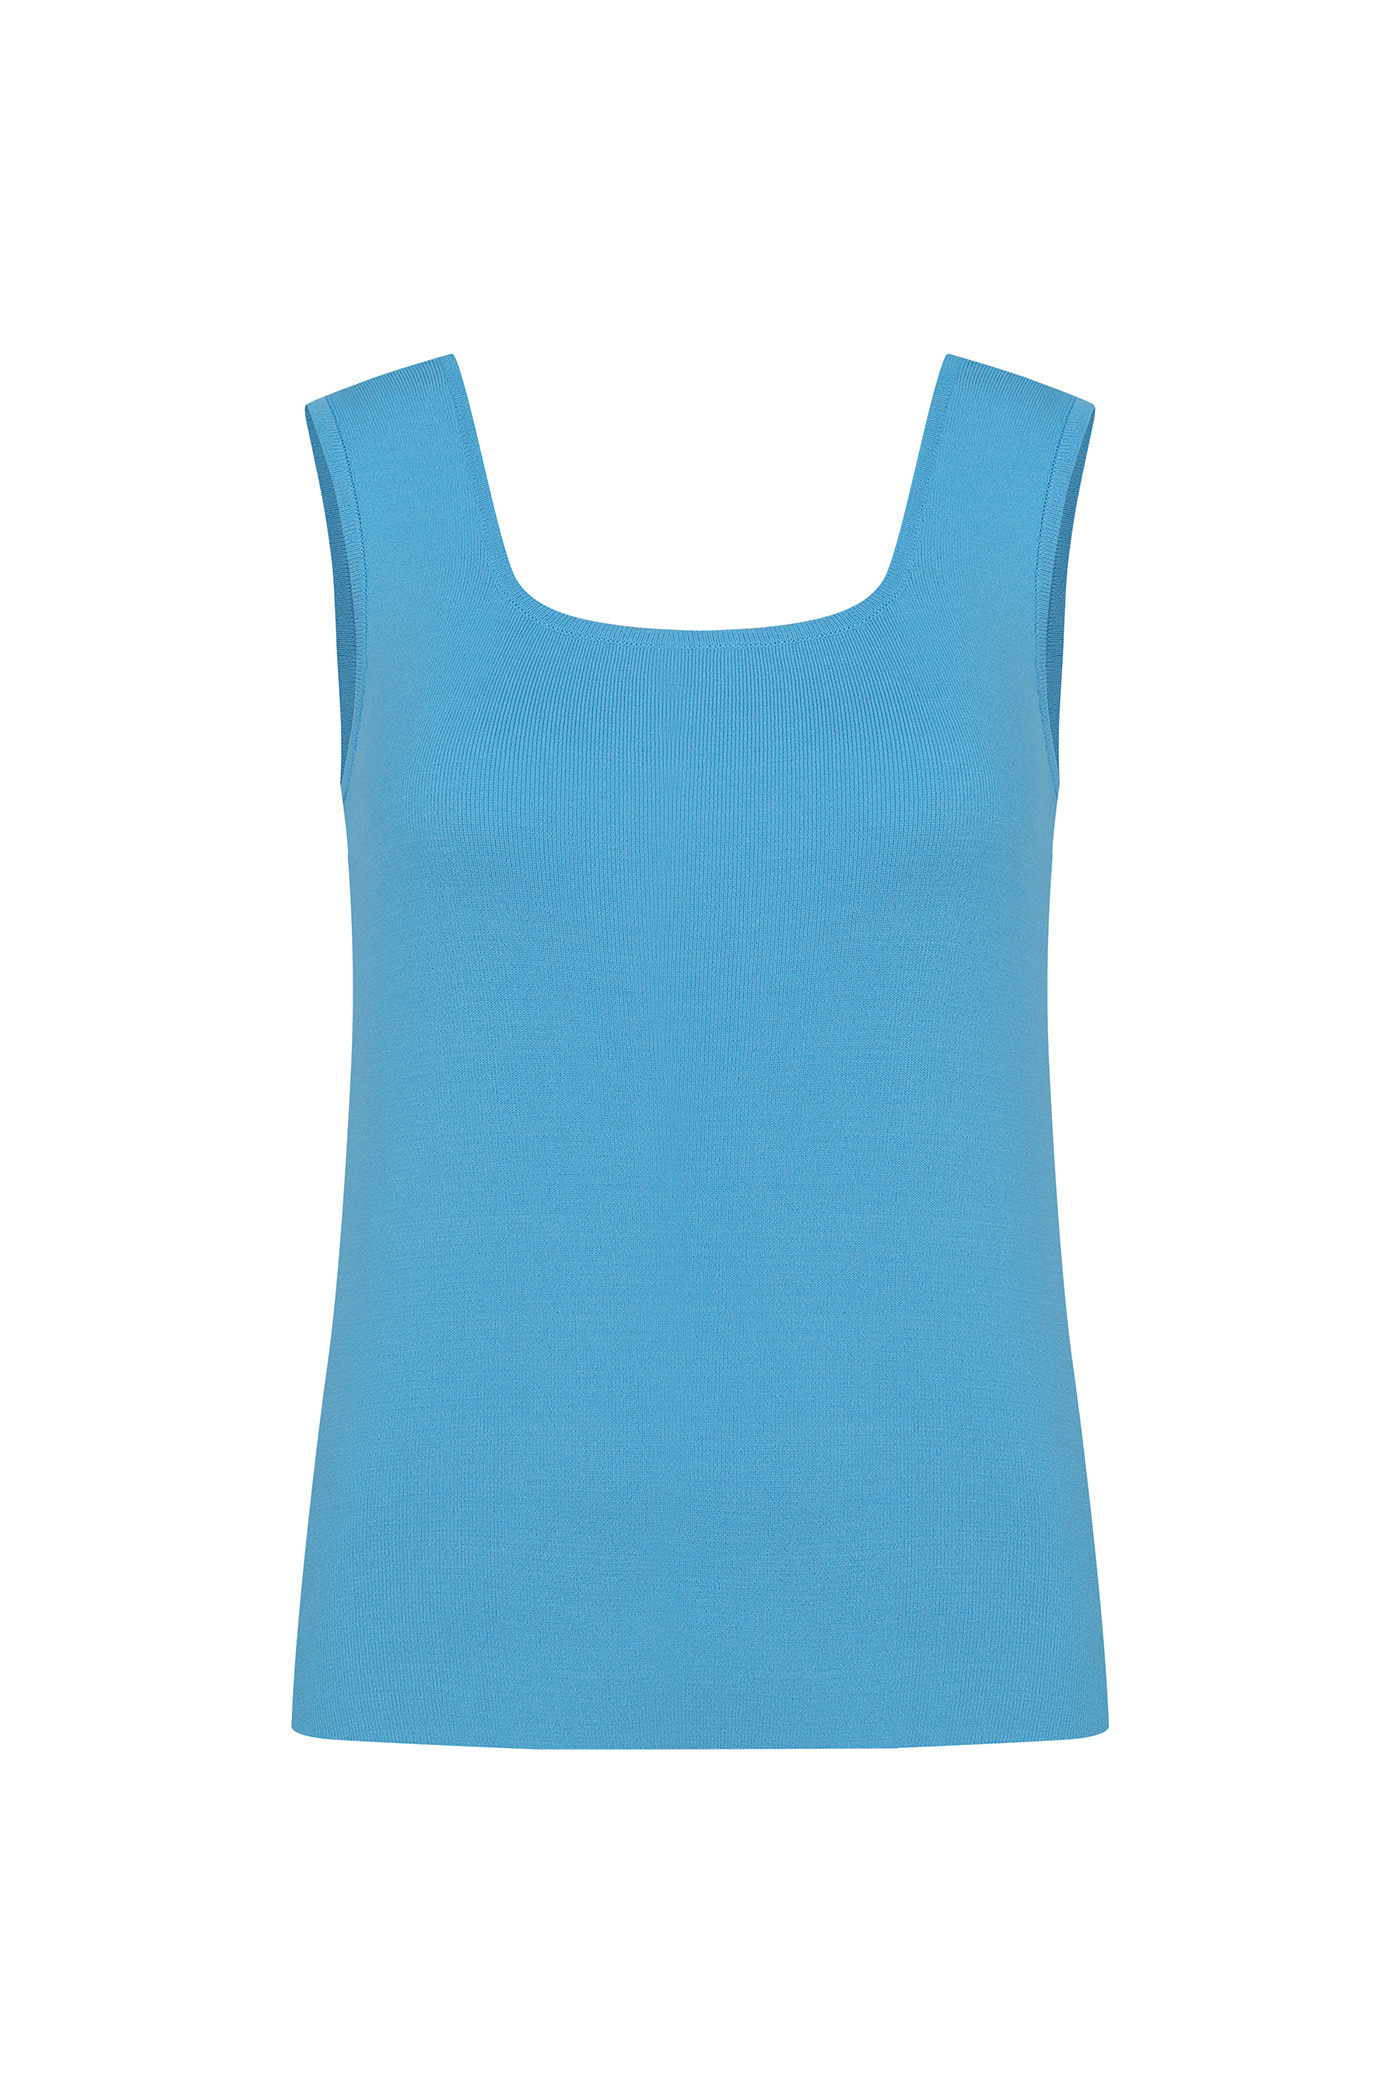 Two-way Sleeveless Knit Top-Sky Blue